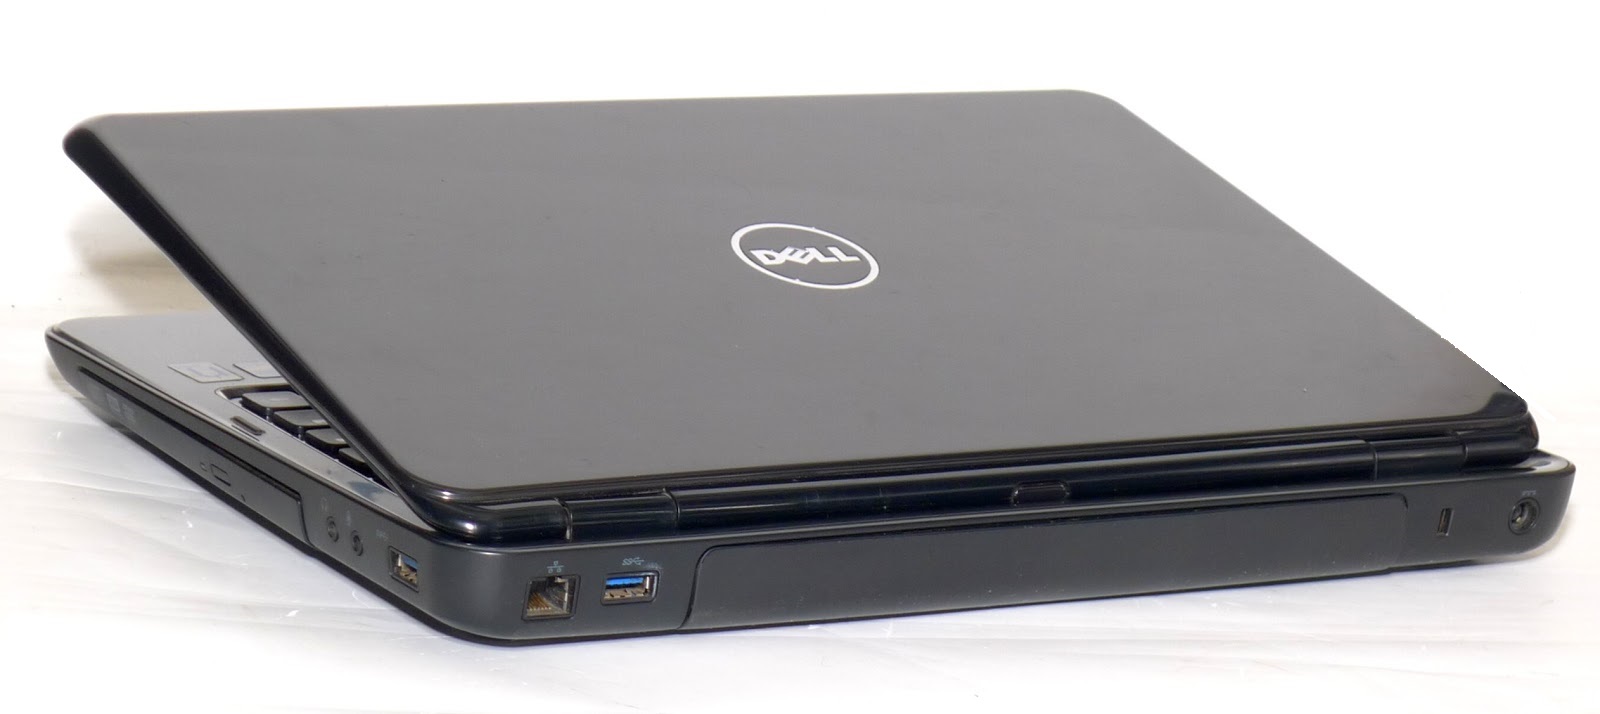 Dell Inspiron n4110. Dell Inspiron n5020. Jual Laptop dell Inspiron 4110 Core i3. Dell Inspiron n4110 Block.